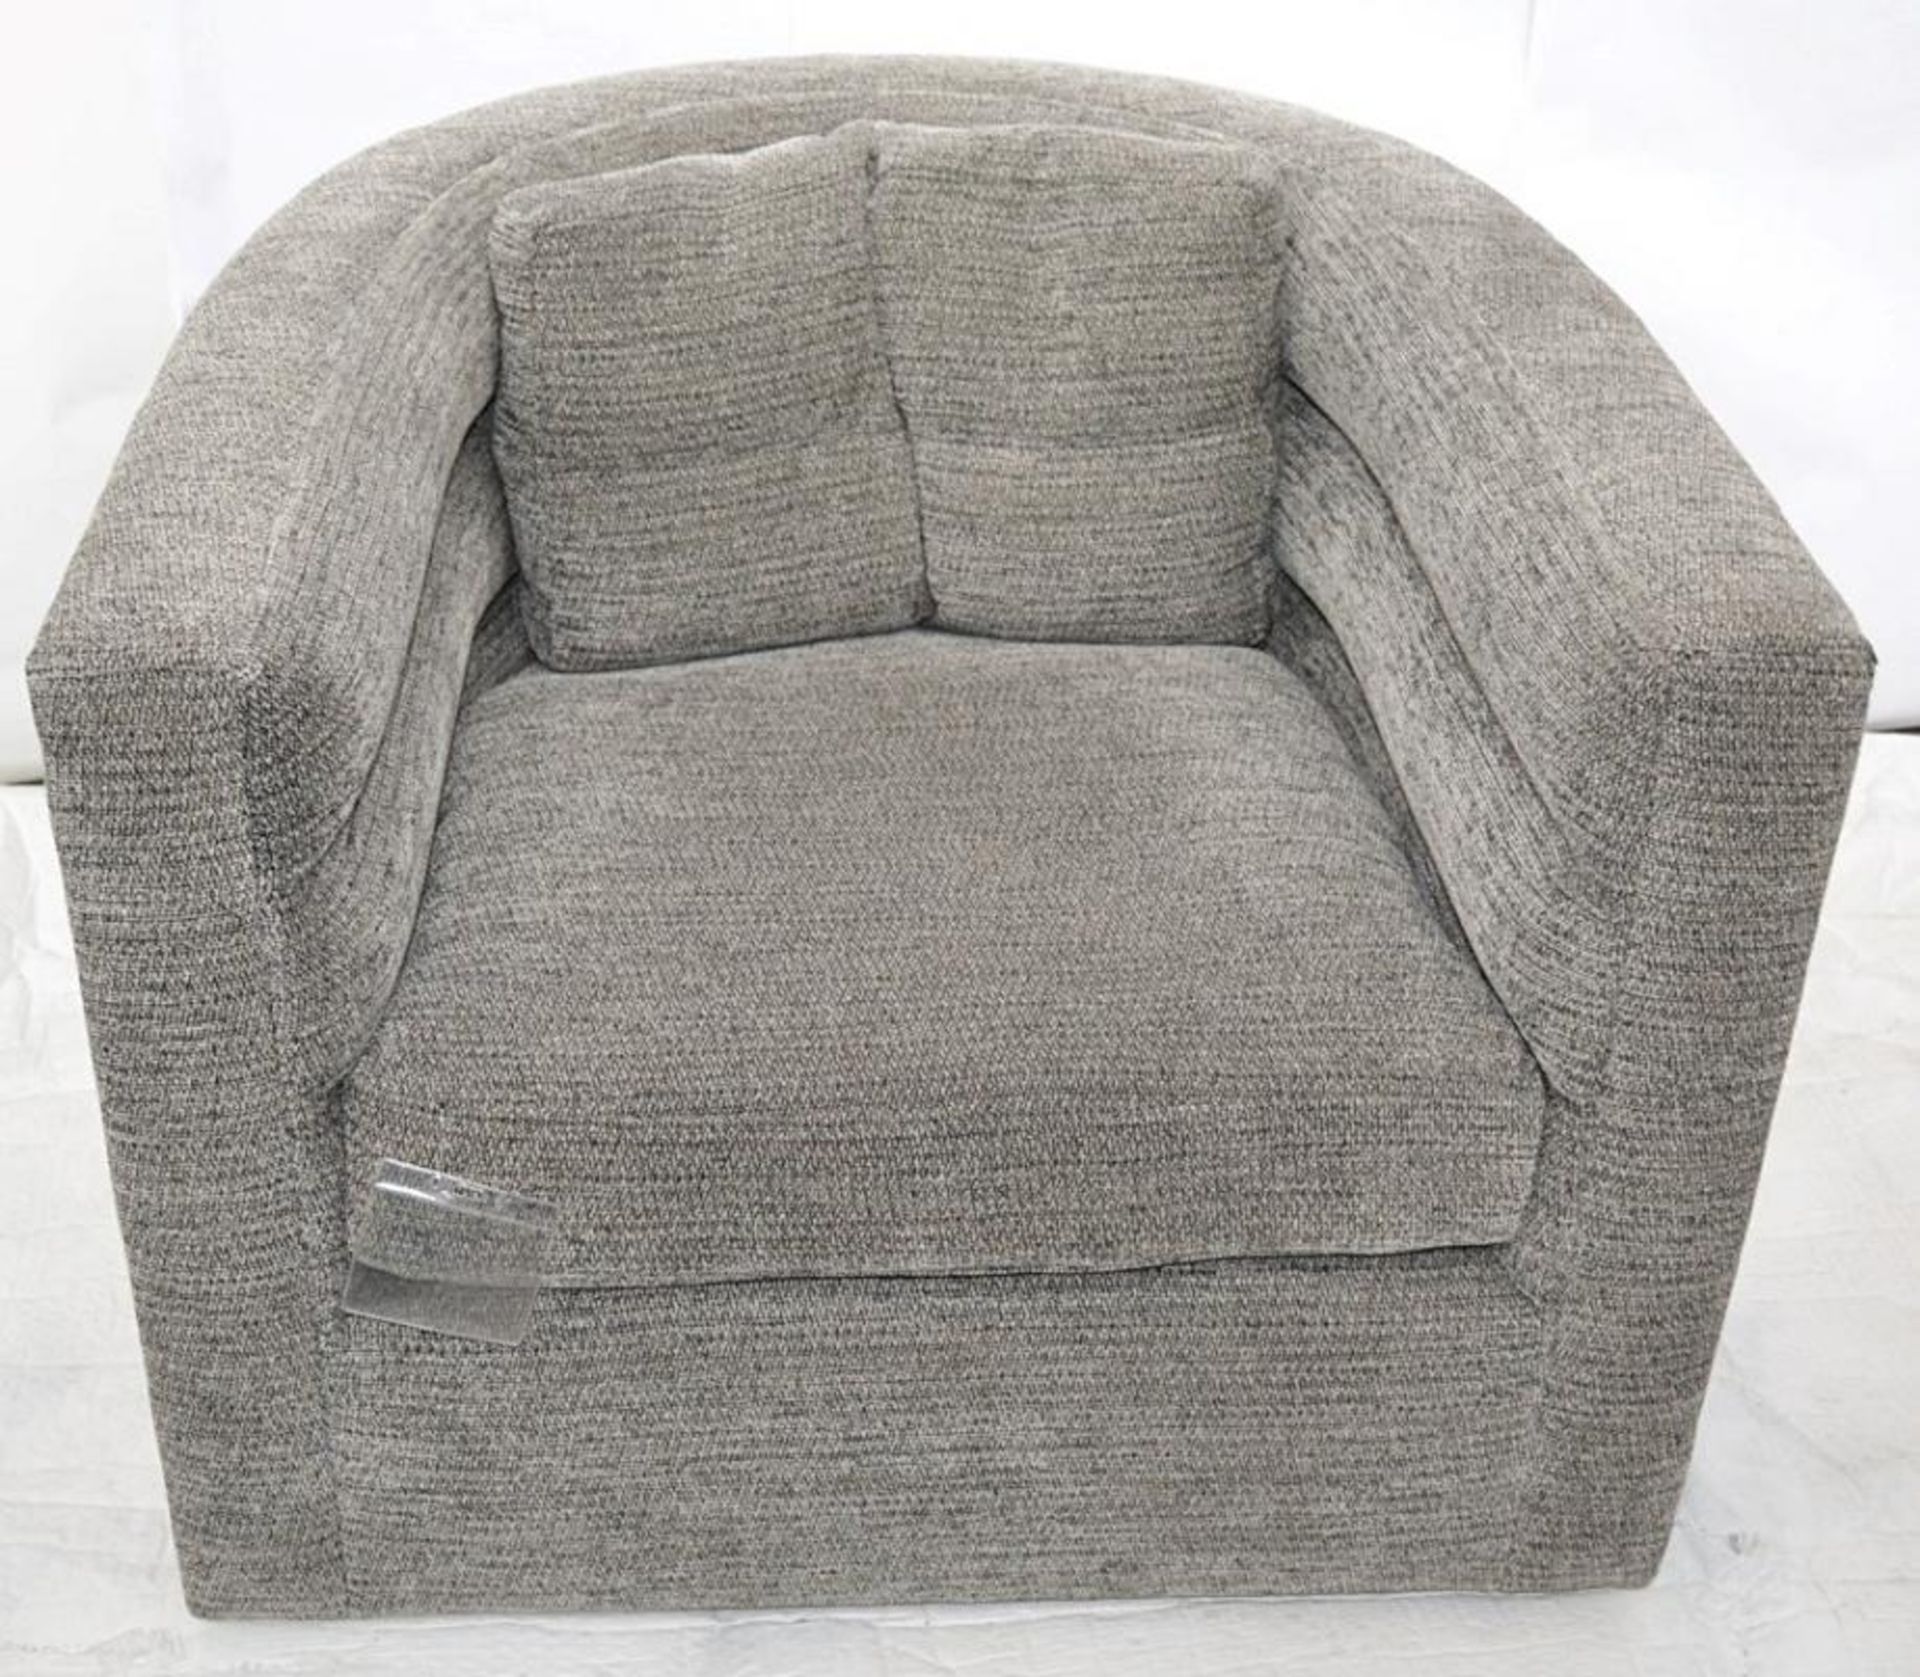 1 x KELLY WEARSTLER Melrose Club Chair In Grey - Dimensions: W36" x D38" x H28" - Ref: 5223289 - CL0 - Image 15 of 24